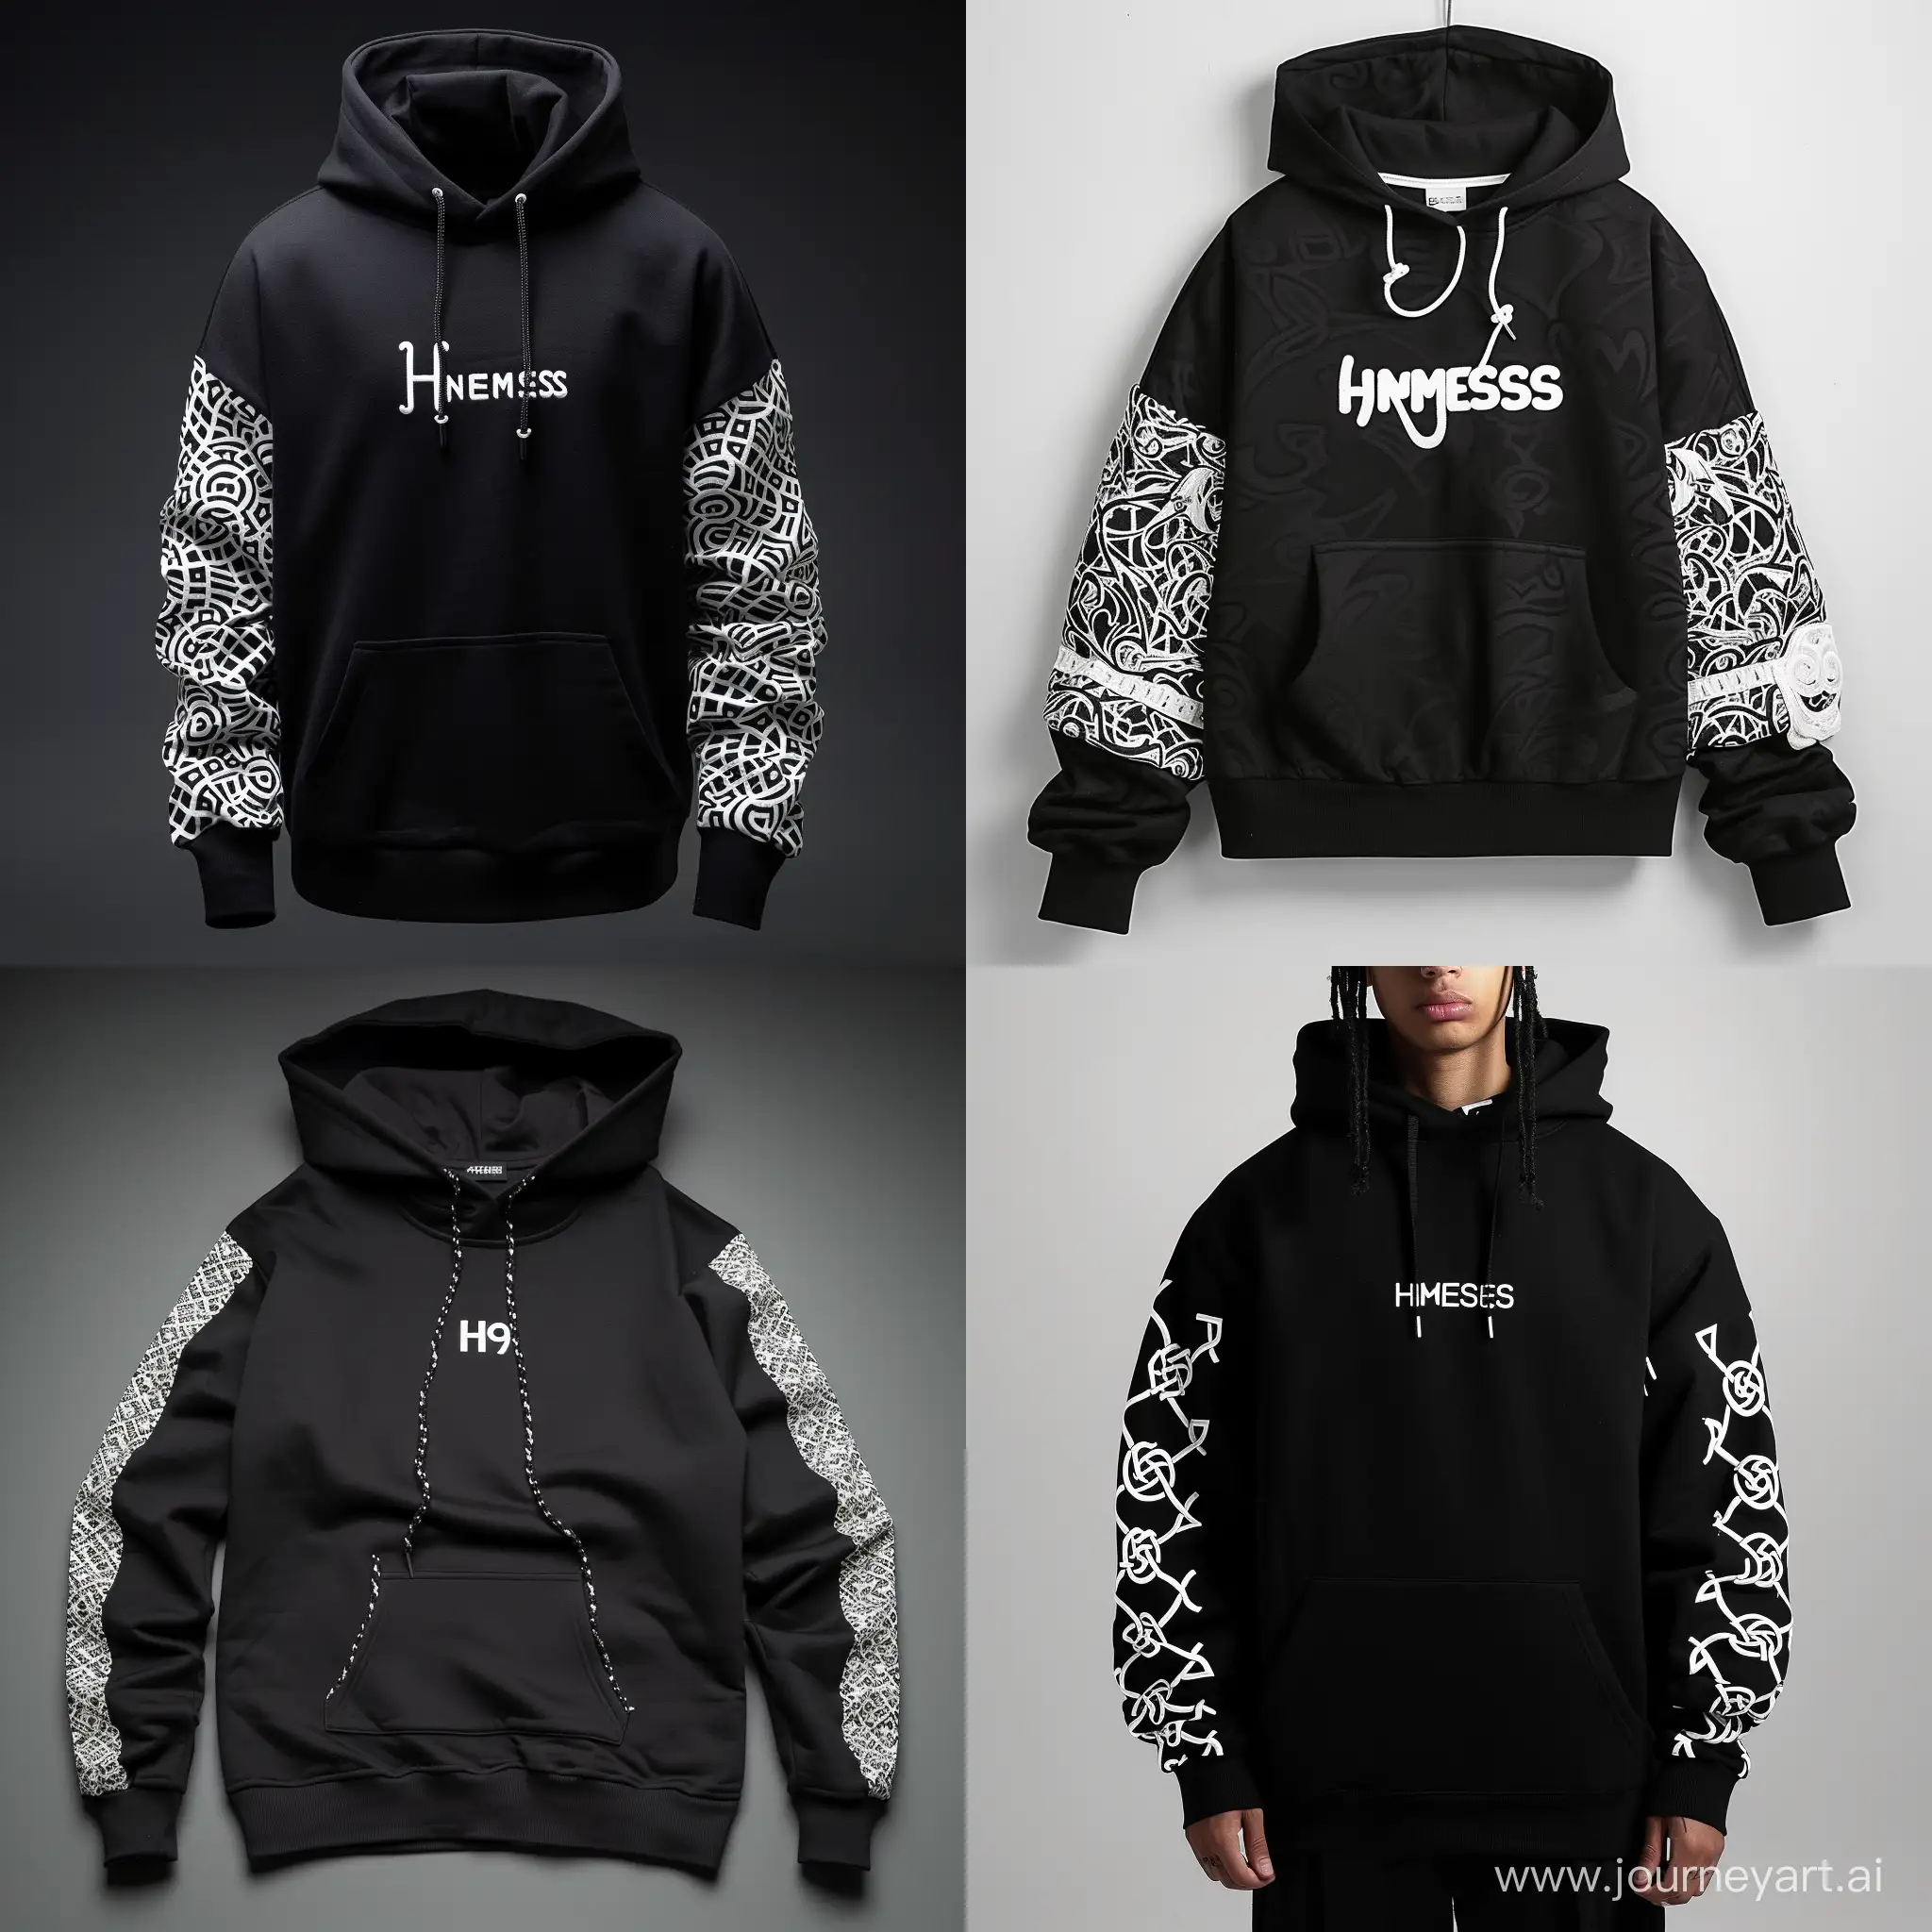 Stylish-Black-Hoodie-with-White-Patterns-and-h9nemesis-Embroidery